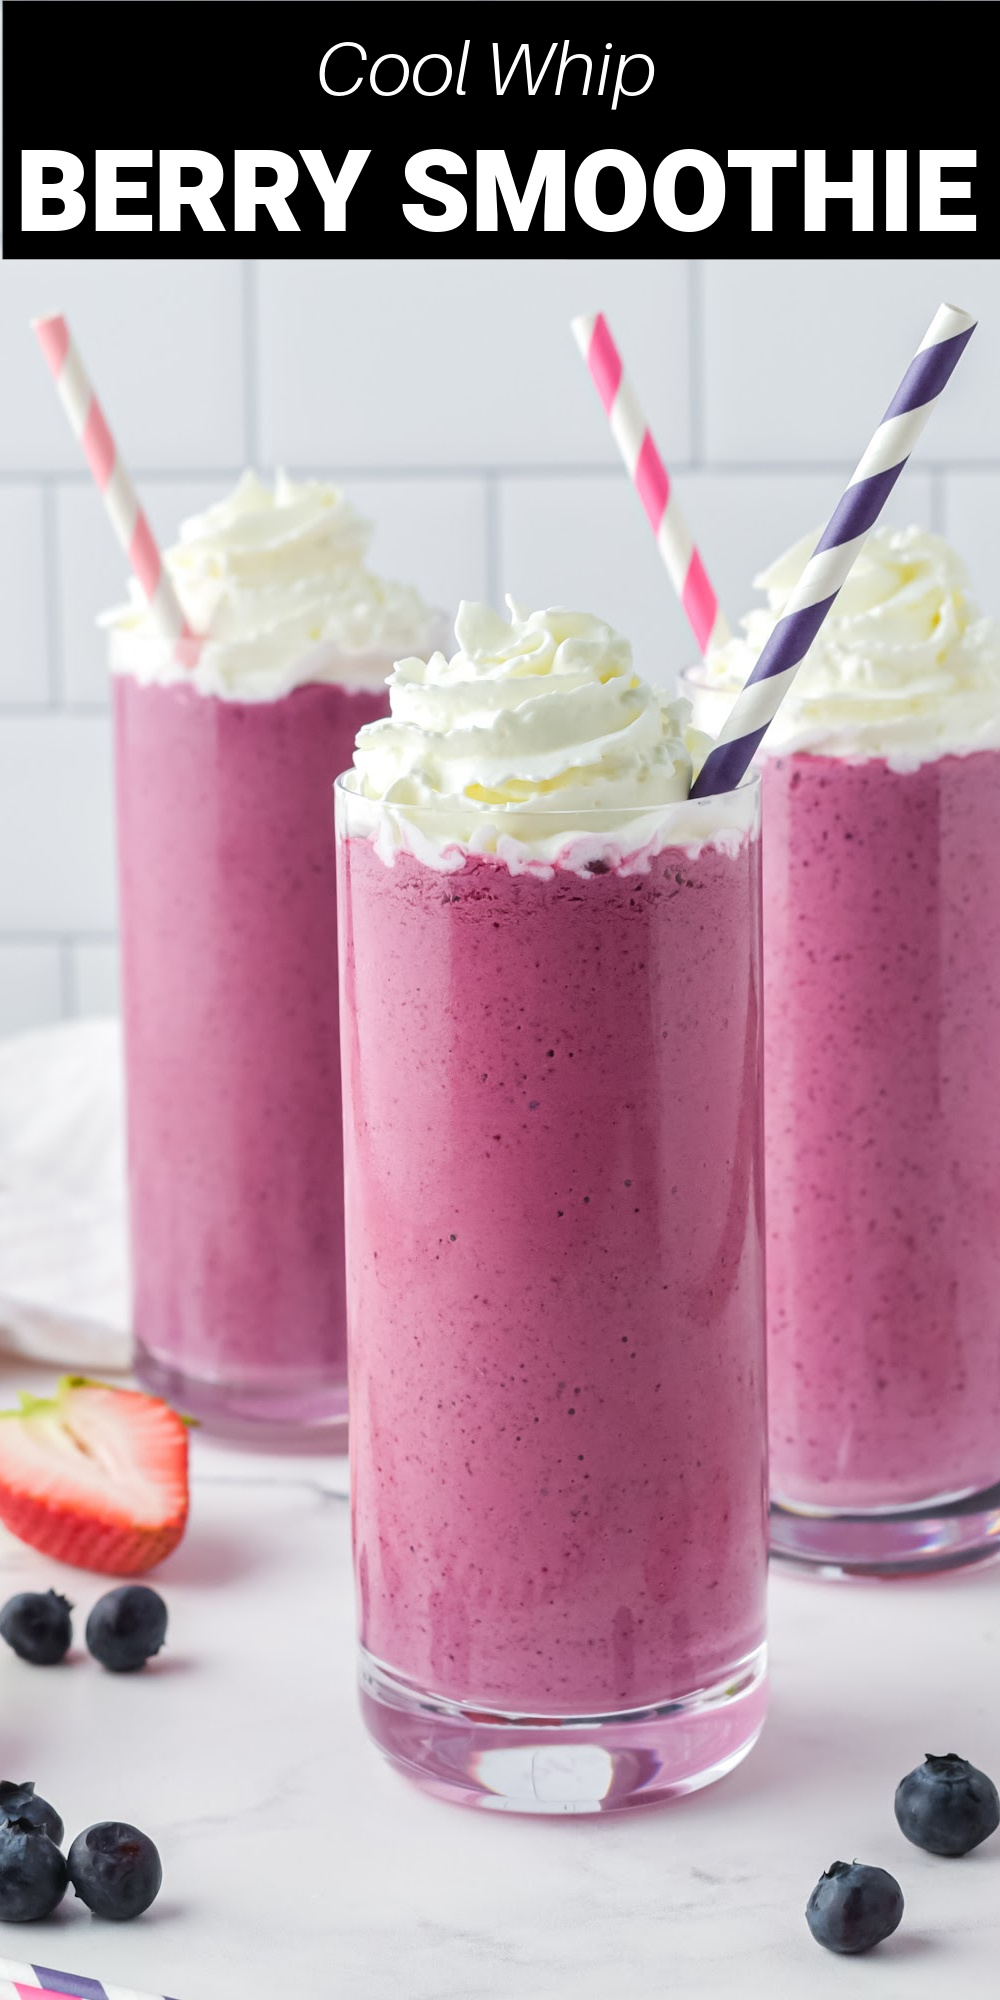 This Cool Whip Berry Smoothie is a fresh and delicious way to make a healthy breakfast or snack on the go for the whole family. Filled with nutrients and vitamins from your favorite fruits, as well as the light and creamy sweetness of your favorite whipped topping, it's sure to be a hit with everyone.